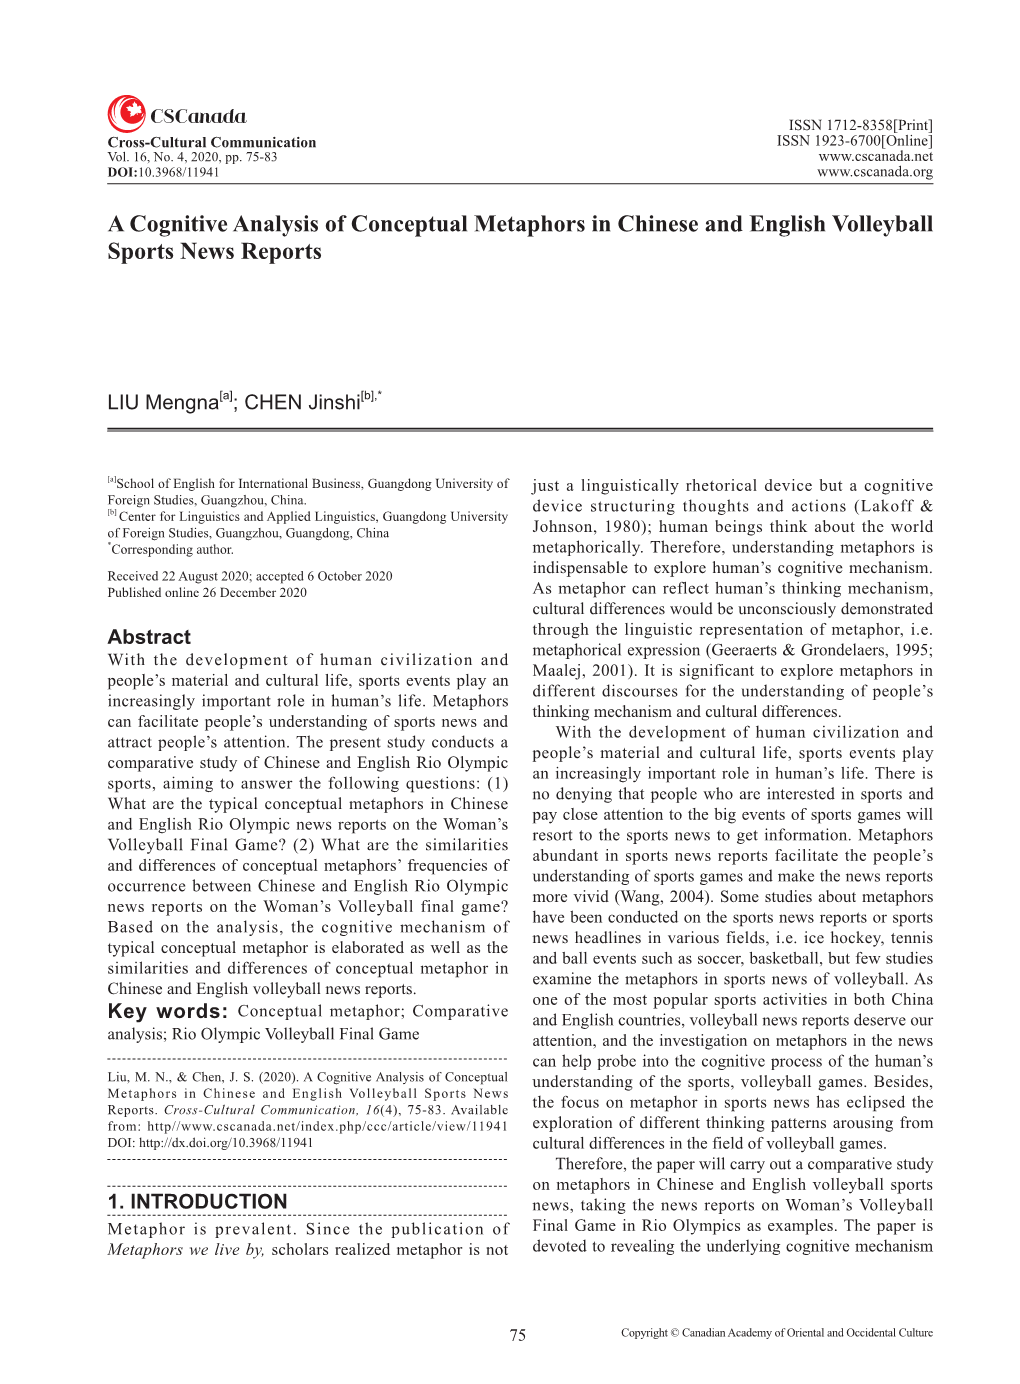 A Cognitive Analysis of Conceptual Metaphors in Chinese and English Volleyball Sports News Reports